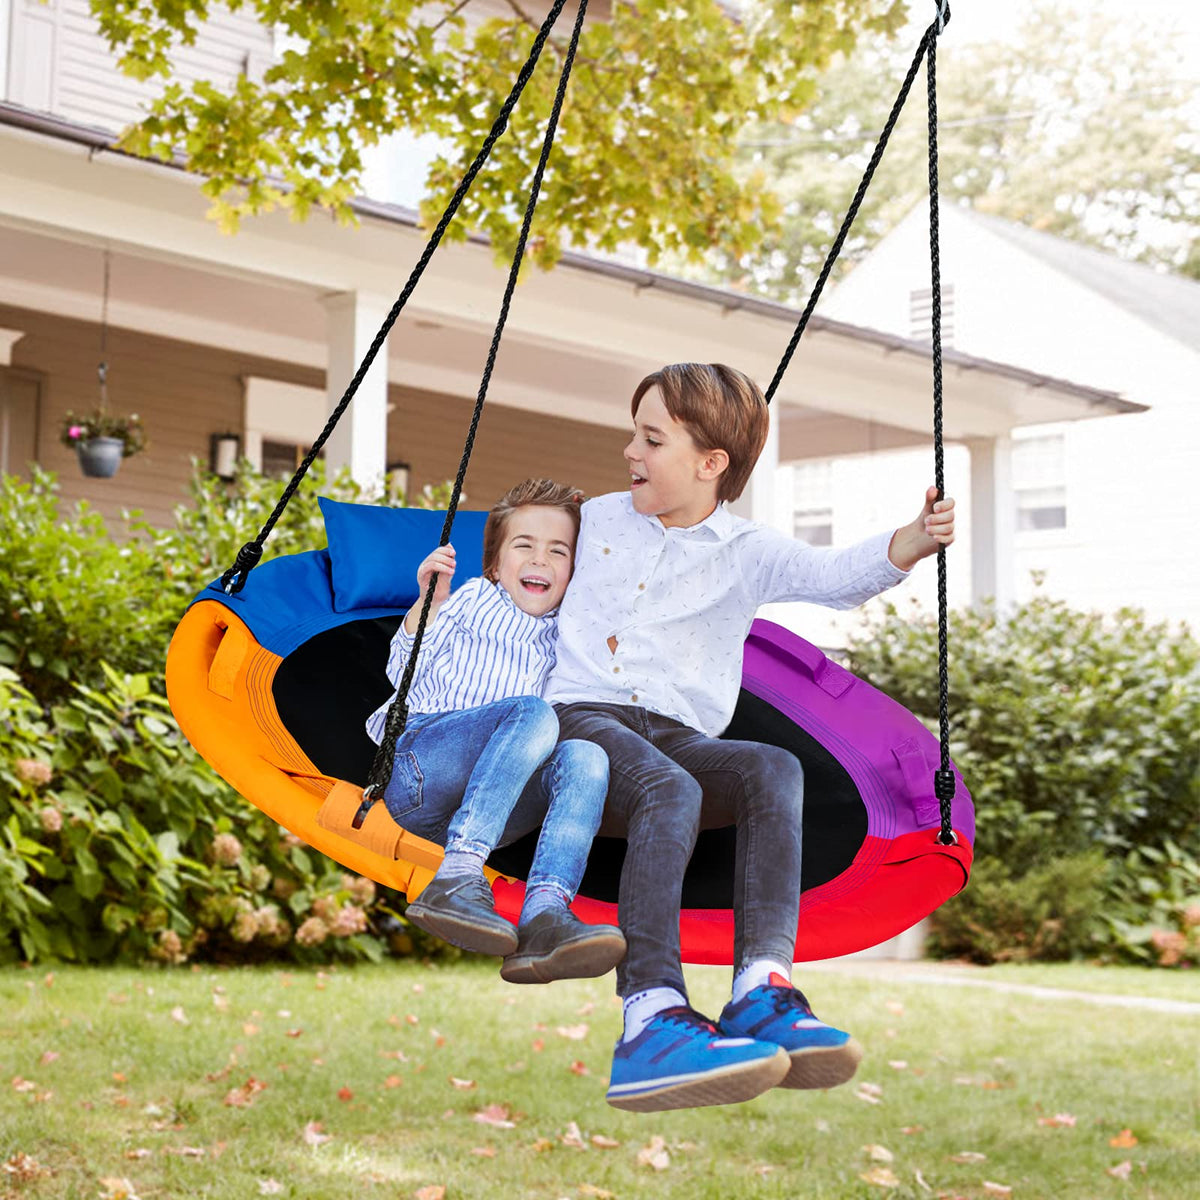 Saucer Tree Swing 100CM, Outdoor Round Hanging Flying Saucer, Multi-Color Hammock Platform Swing Chair